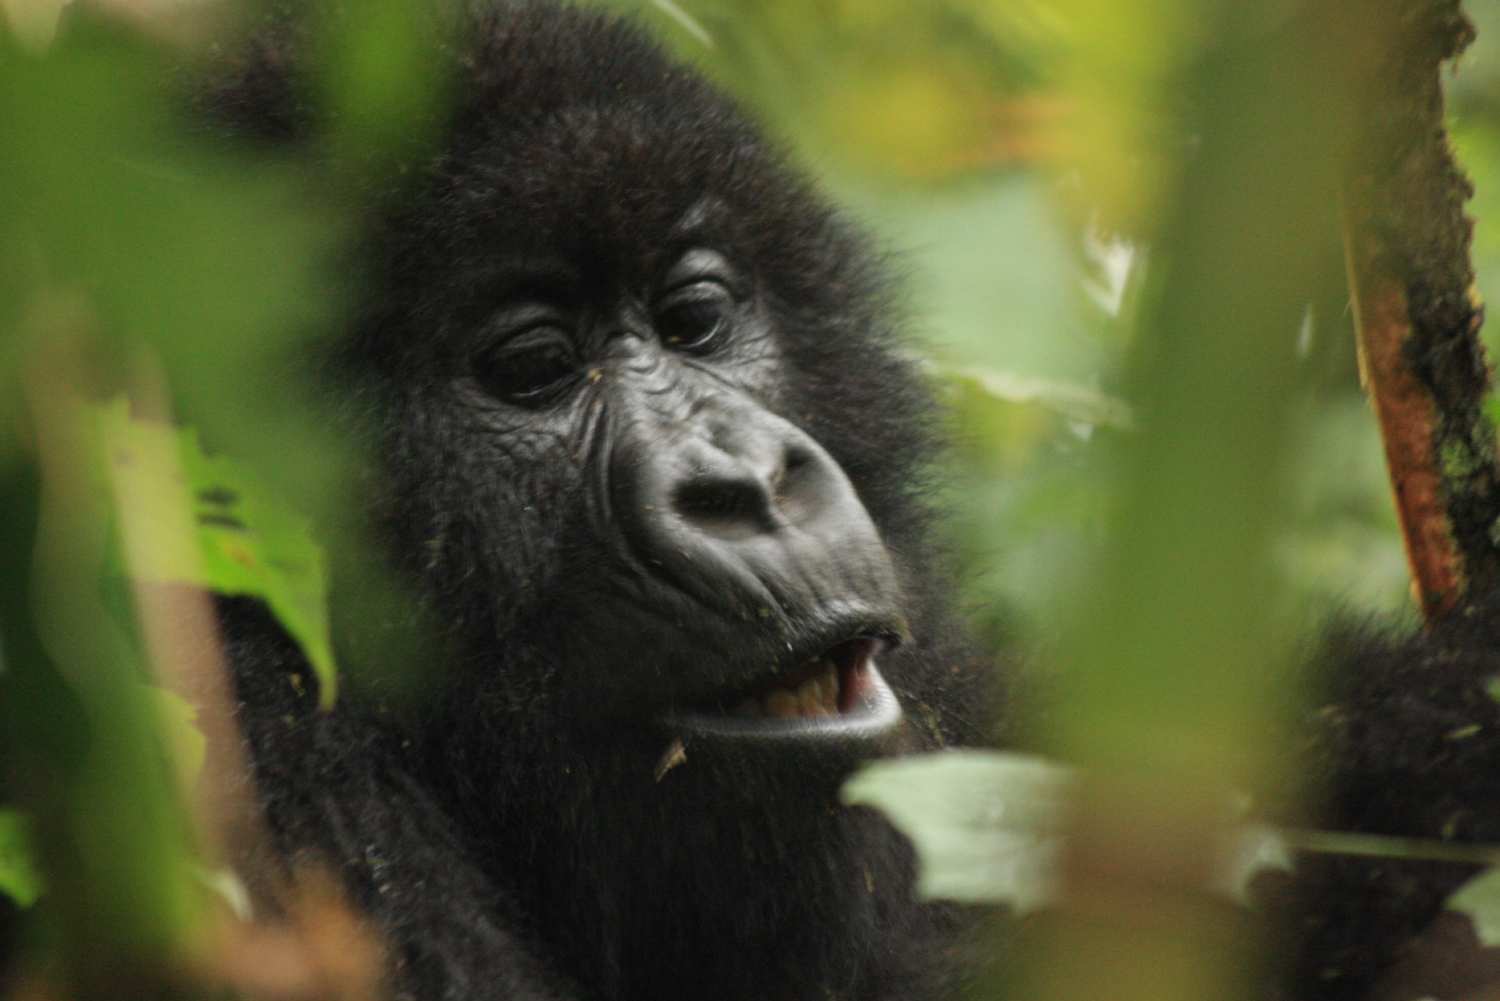 close up of a young gorilla face